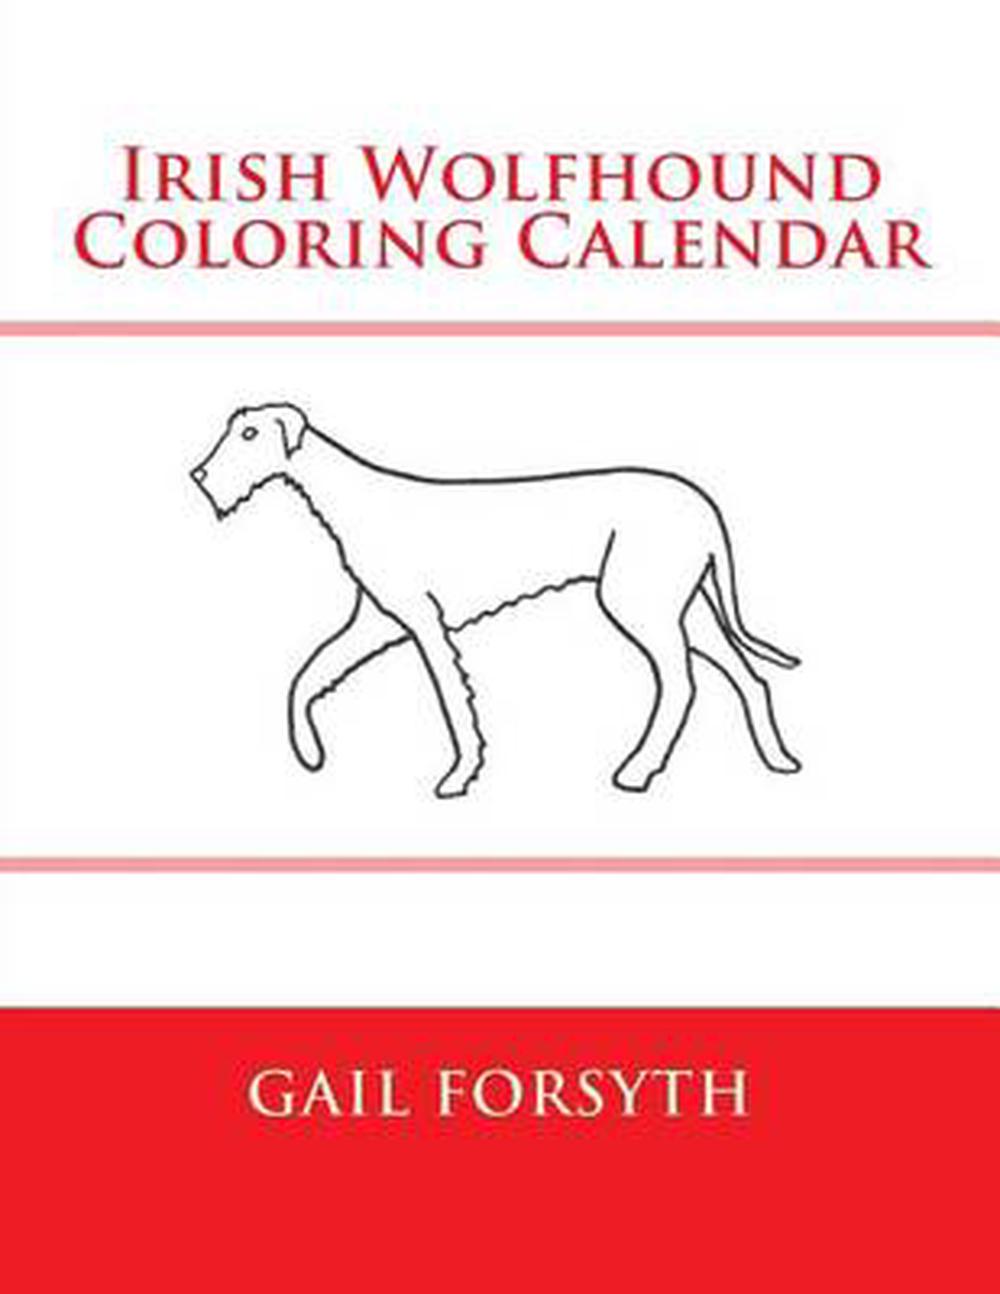 Download Irish Wolfhound Coloring Calendar by Gail Forsyth (English) Paperback Book Free 9781503040427 | eBay